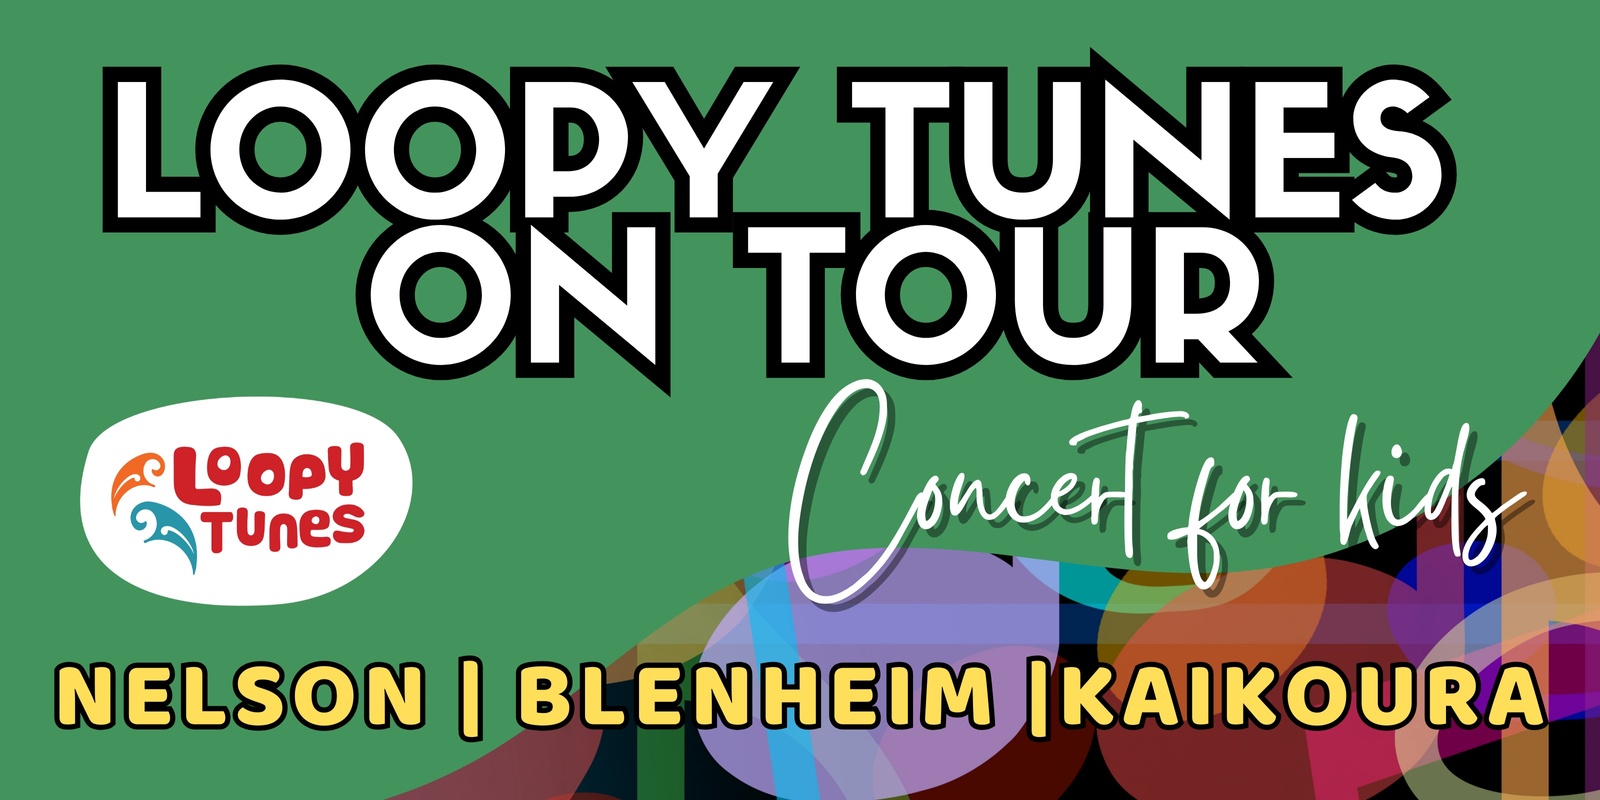 Banner image for Loopy Tunes on Tour - Concert for Kids! [Nelson]